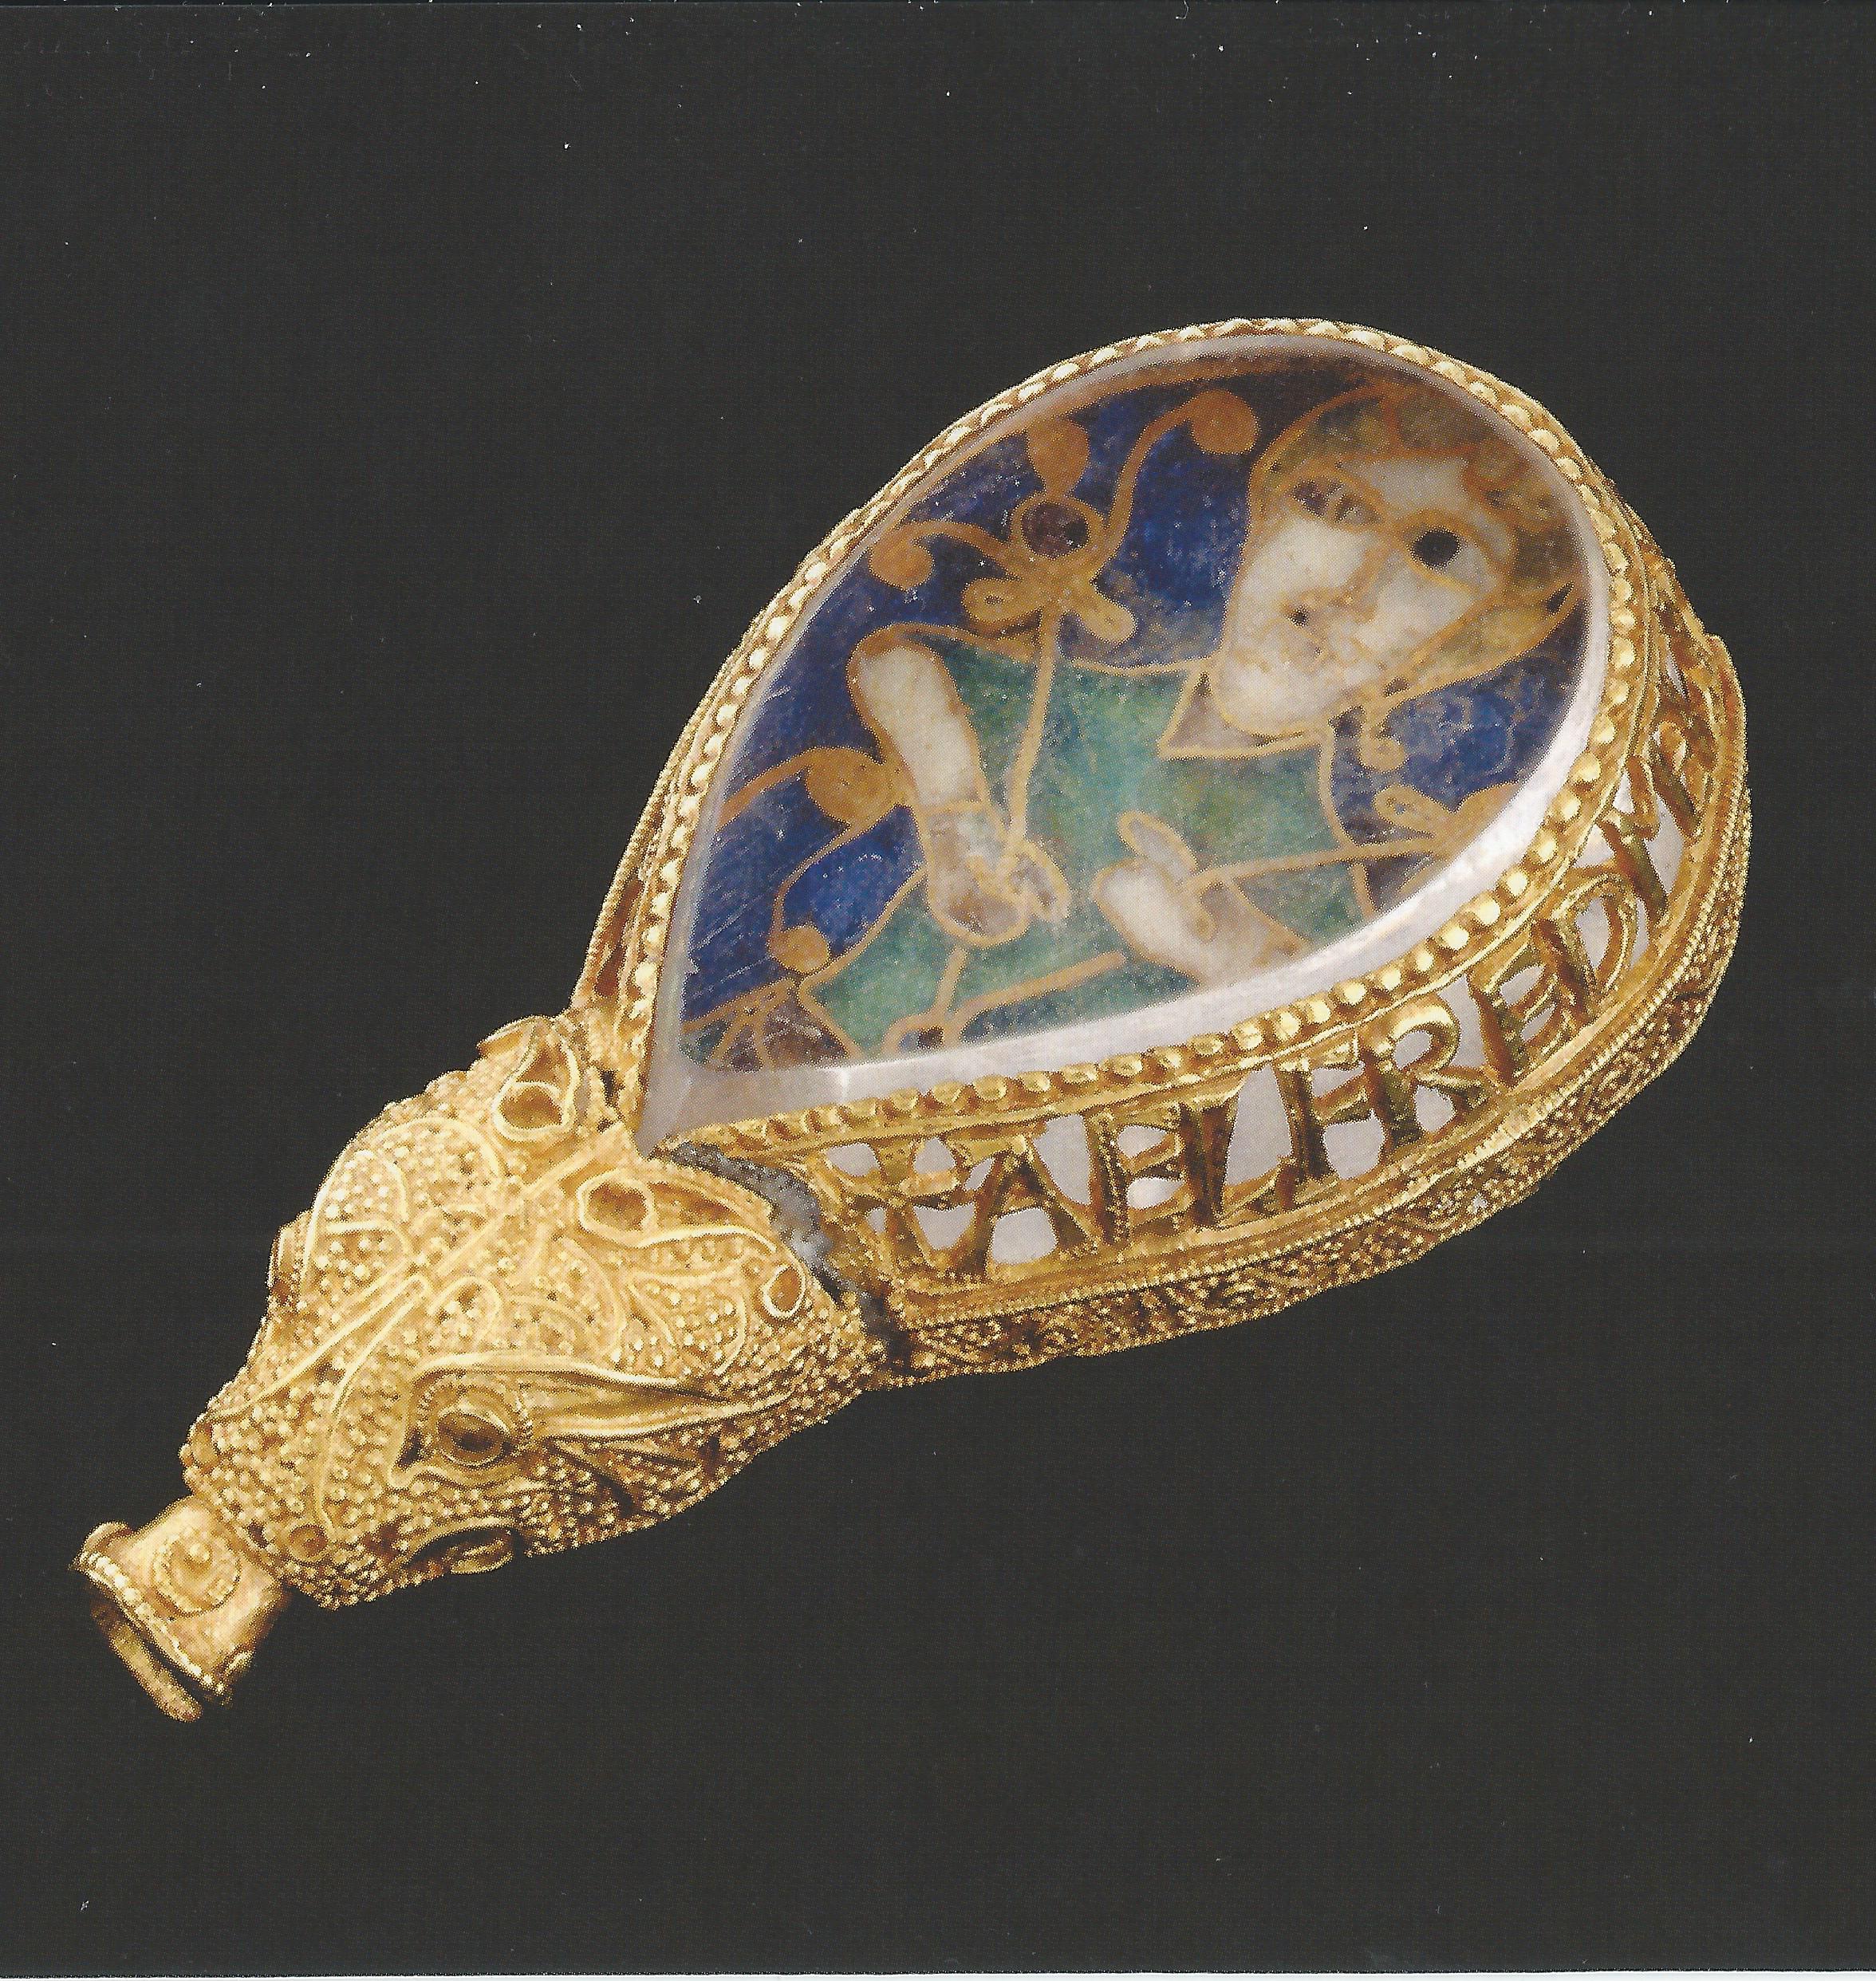 The "Alfred Jewel" by Unknown Artist - Late 9th century - 6.4 cm long Ashmolean Museum